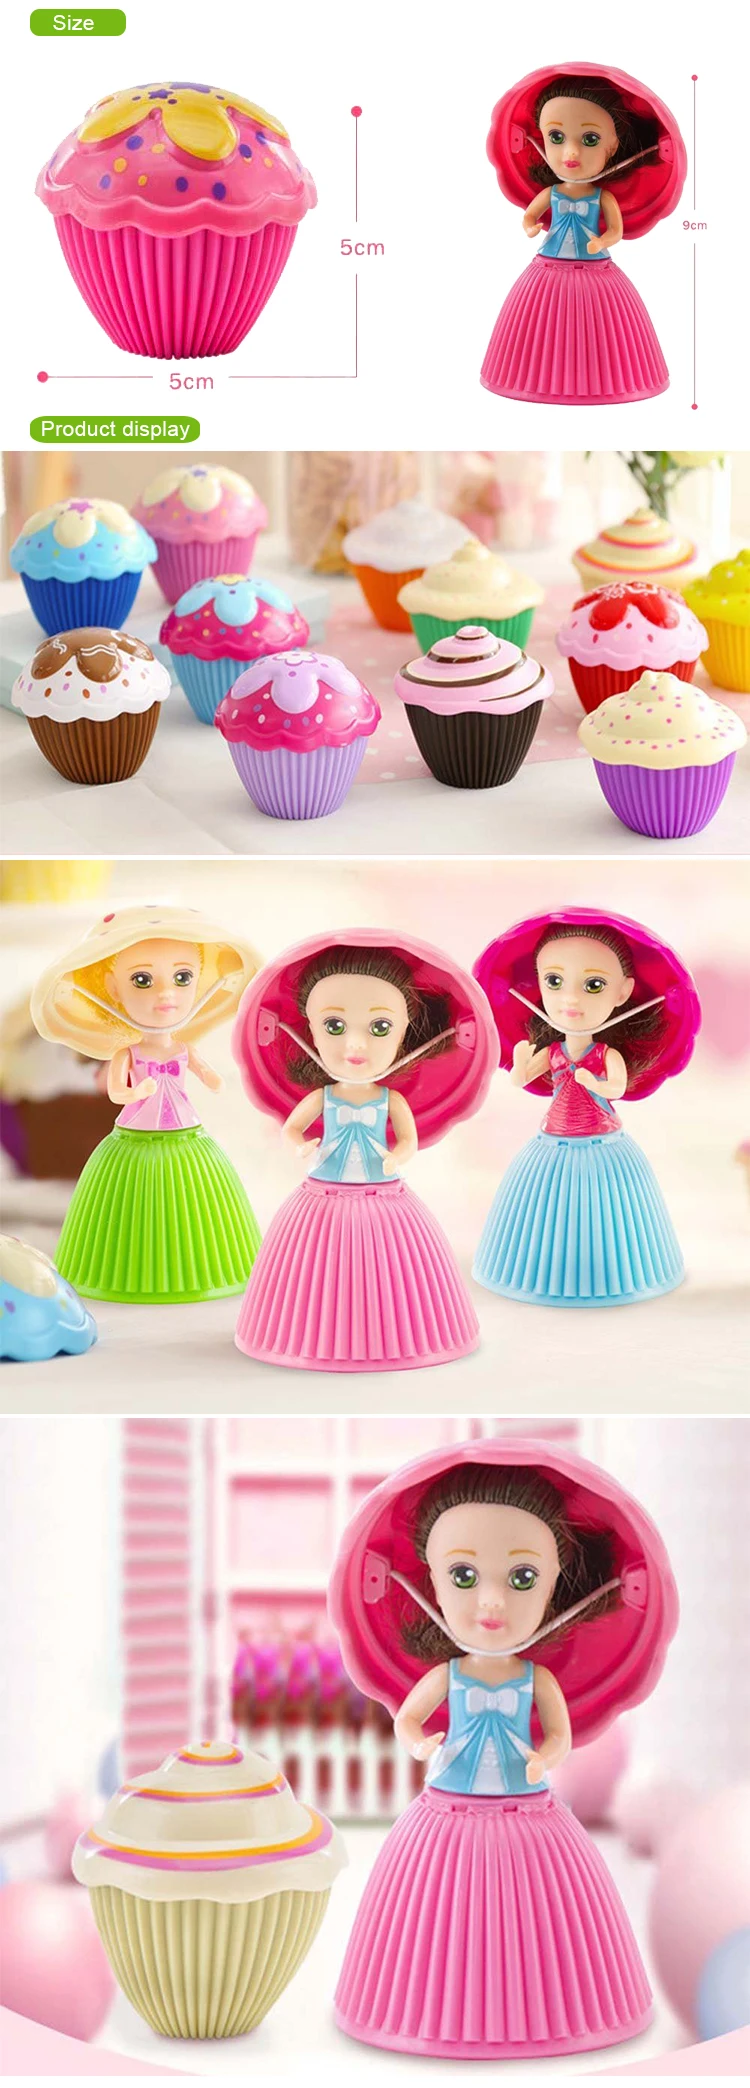 2 Pack Transform Cupcake Doll With 